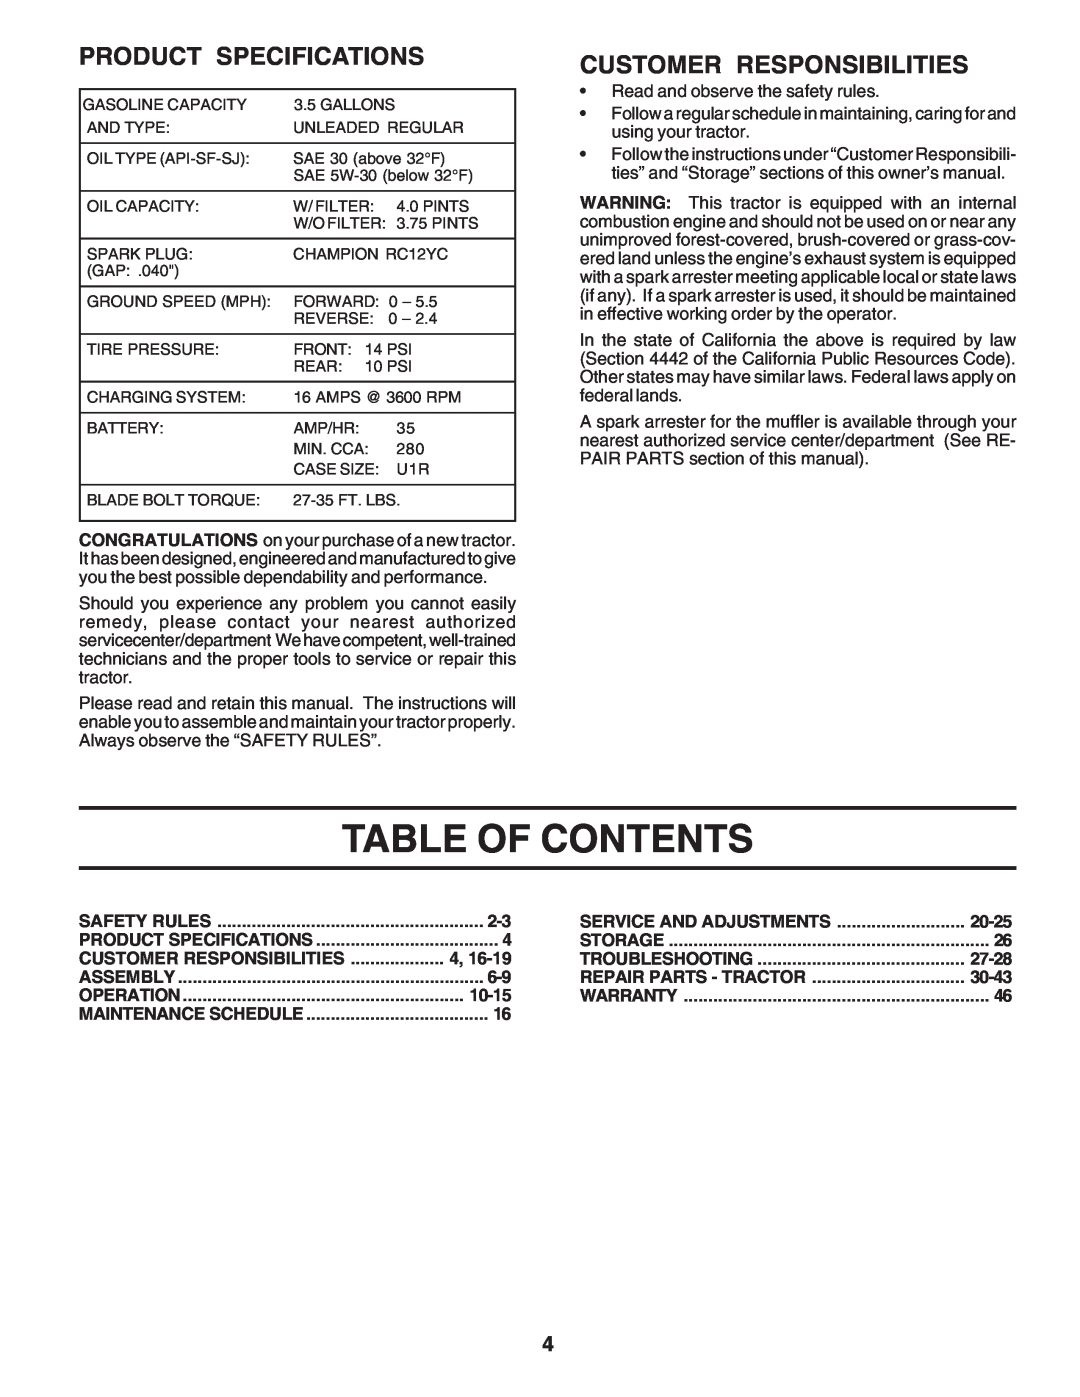 Poulan 183284 owner manual Table Of Contents, Product Specifications, Customer Responsibilities 